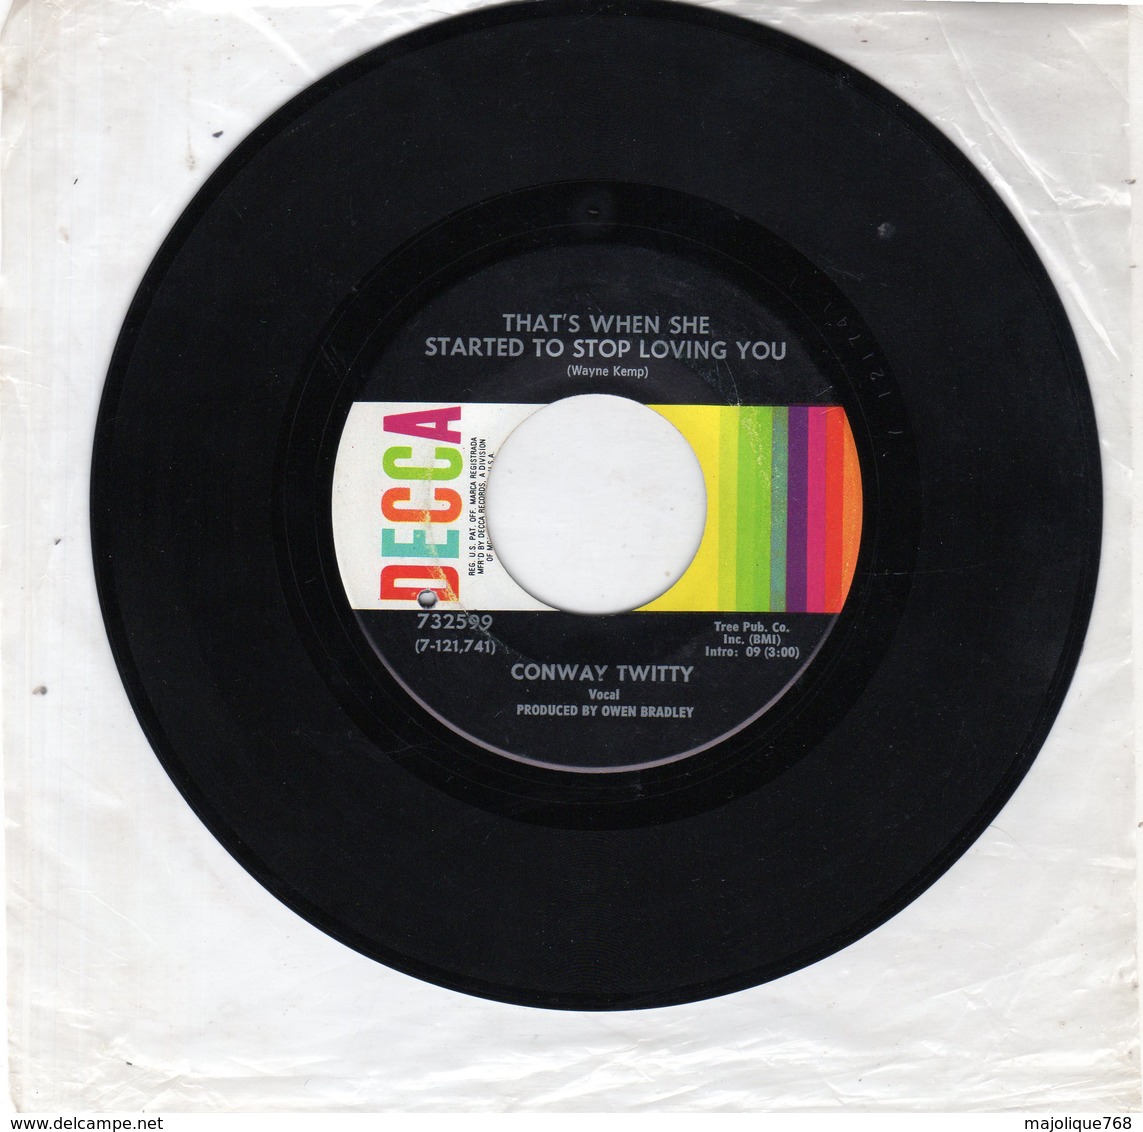 Conway Twitty - That'S When She Started To Stop Loving You - I'LL Get Over Losing You - DECCA 732599 - 1969 US - Country Y Folk